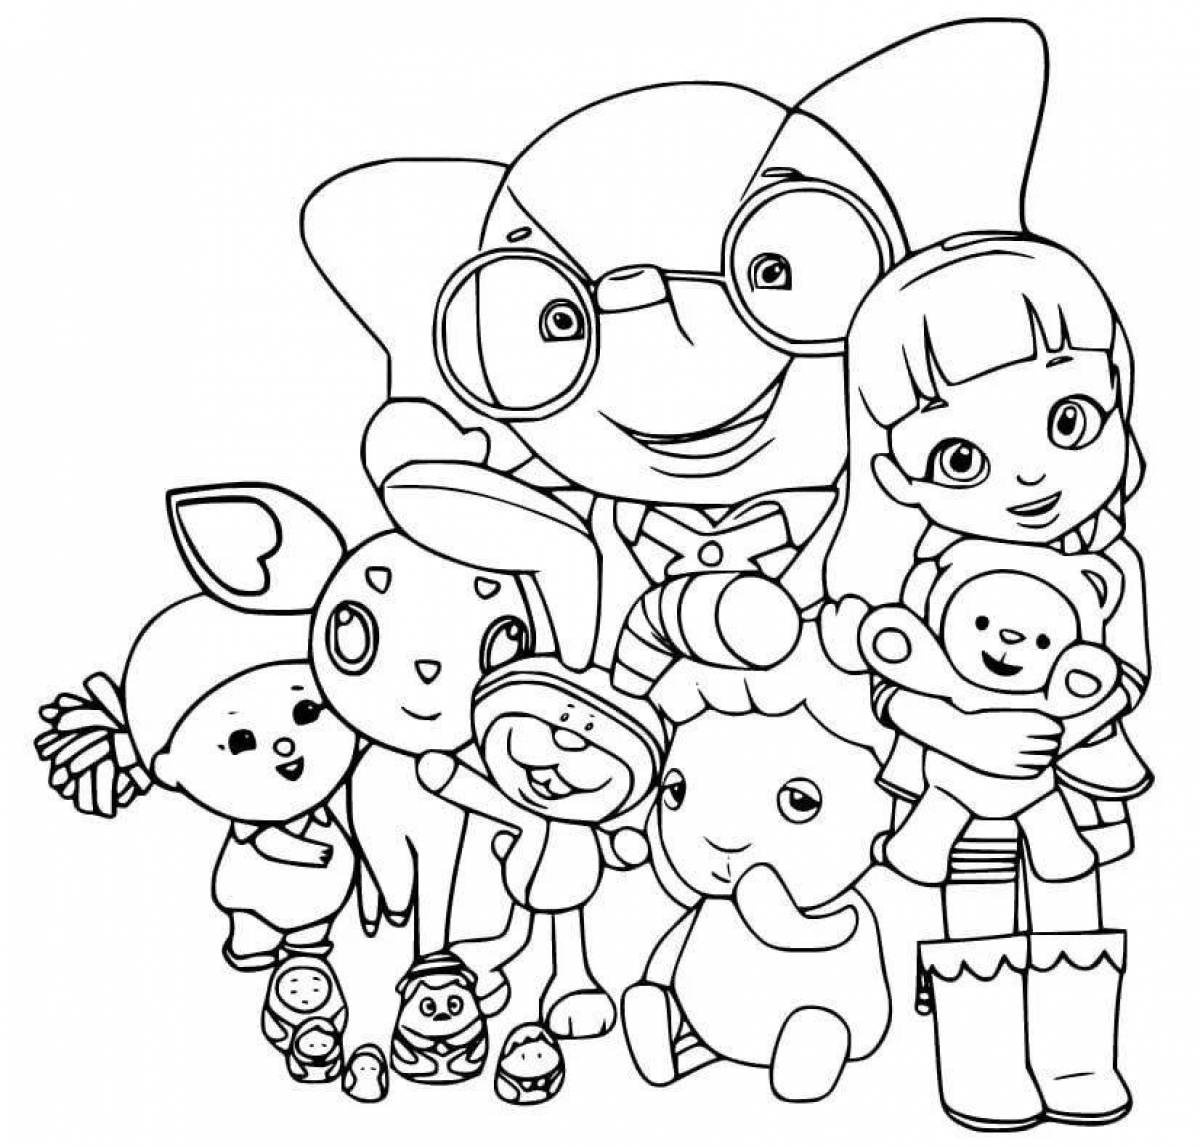 Glowing rainbow friends coloring page